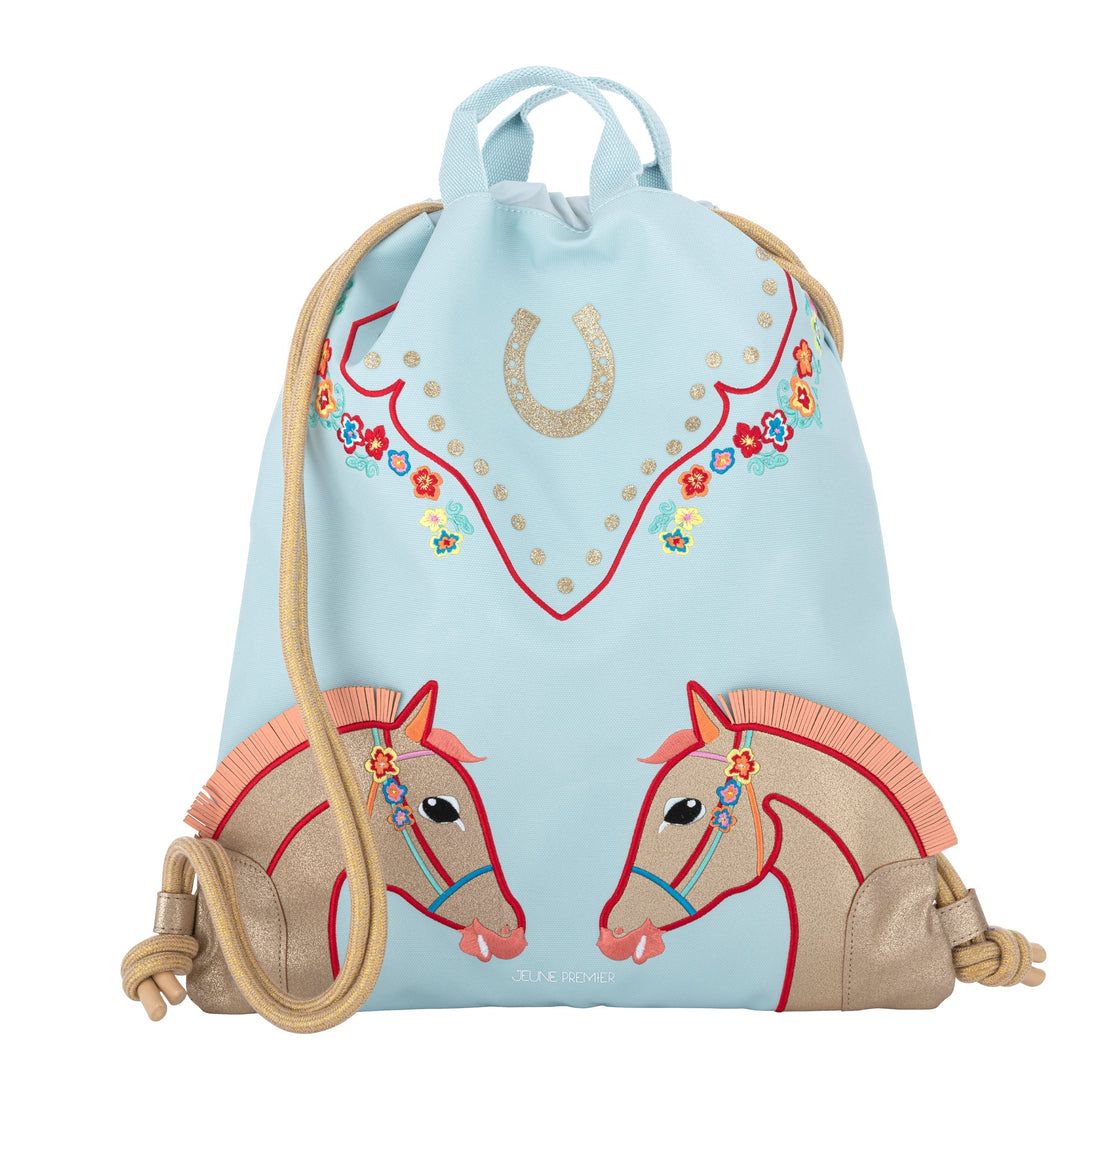 Horse girls will love the light blue Jeune Premier Cavalerie Florale collection, including school bags, backpacks, pencil boxes & other cool school accessories!